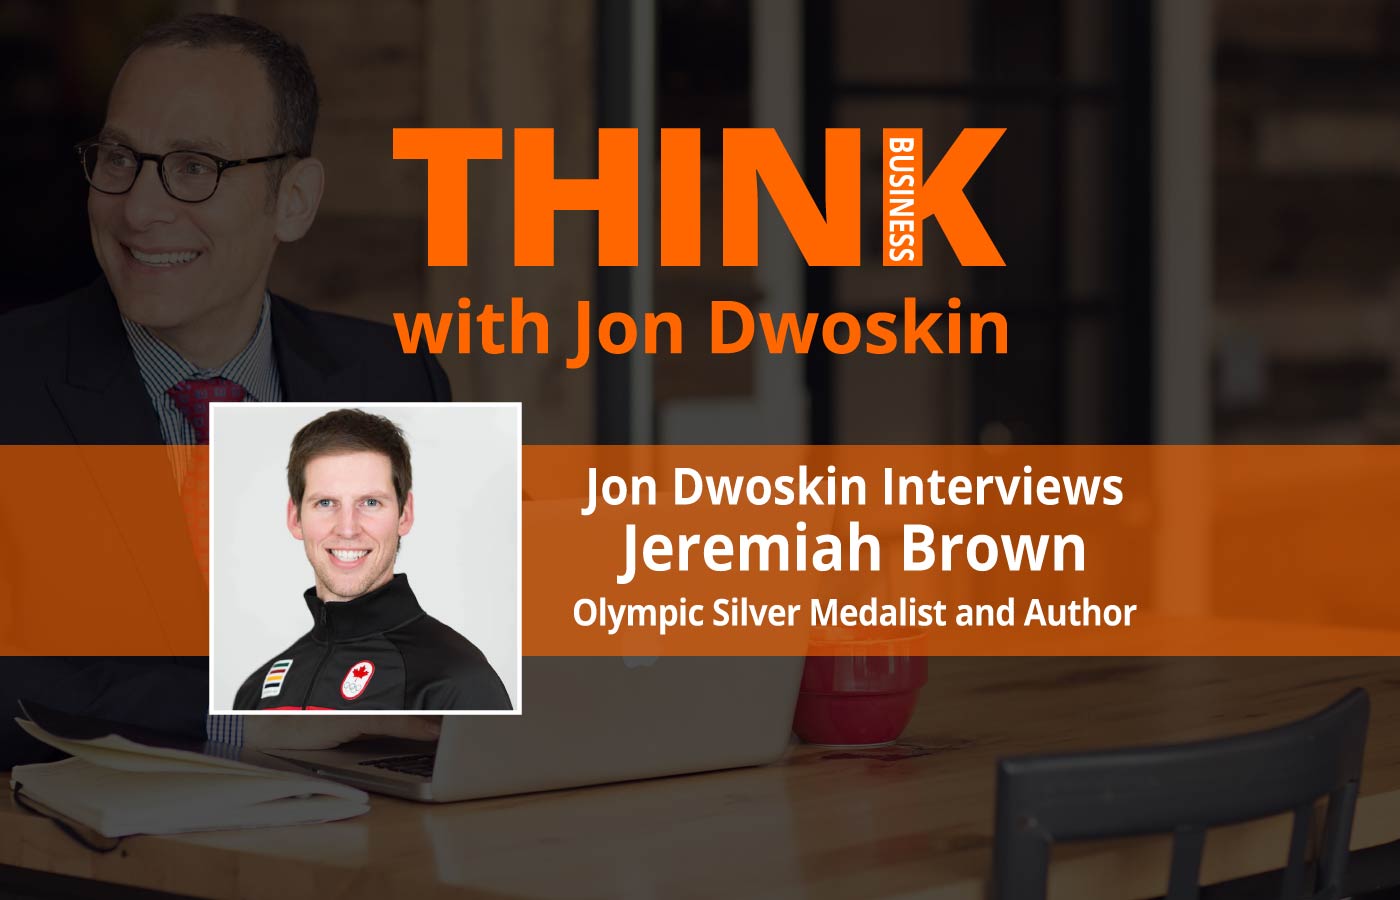 THINK Business Podcast: Jon Dwoskin Interviews Jeremiah Brown, Olympic Silver Medalist and Author